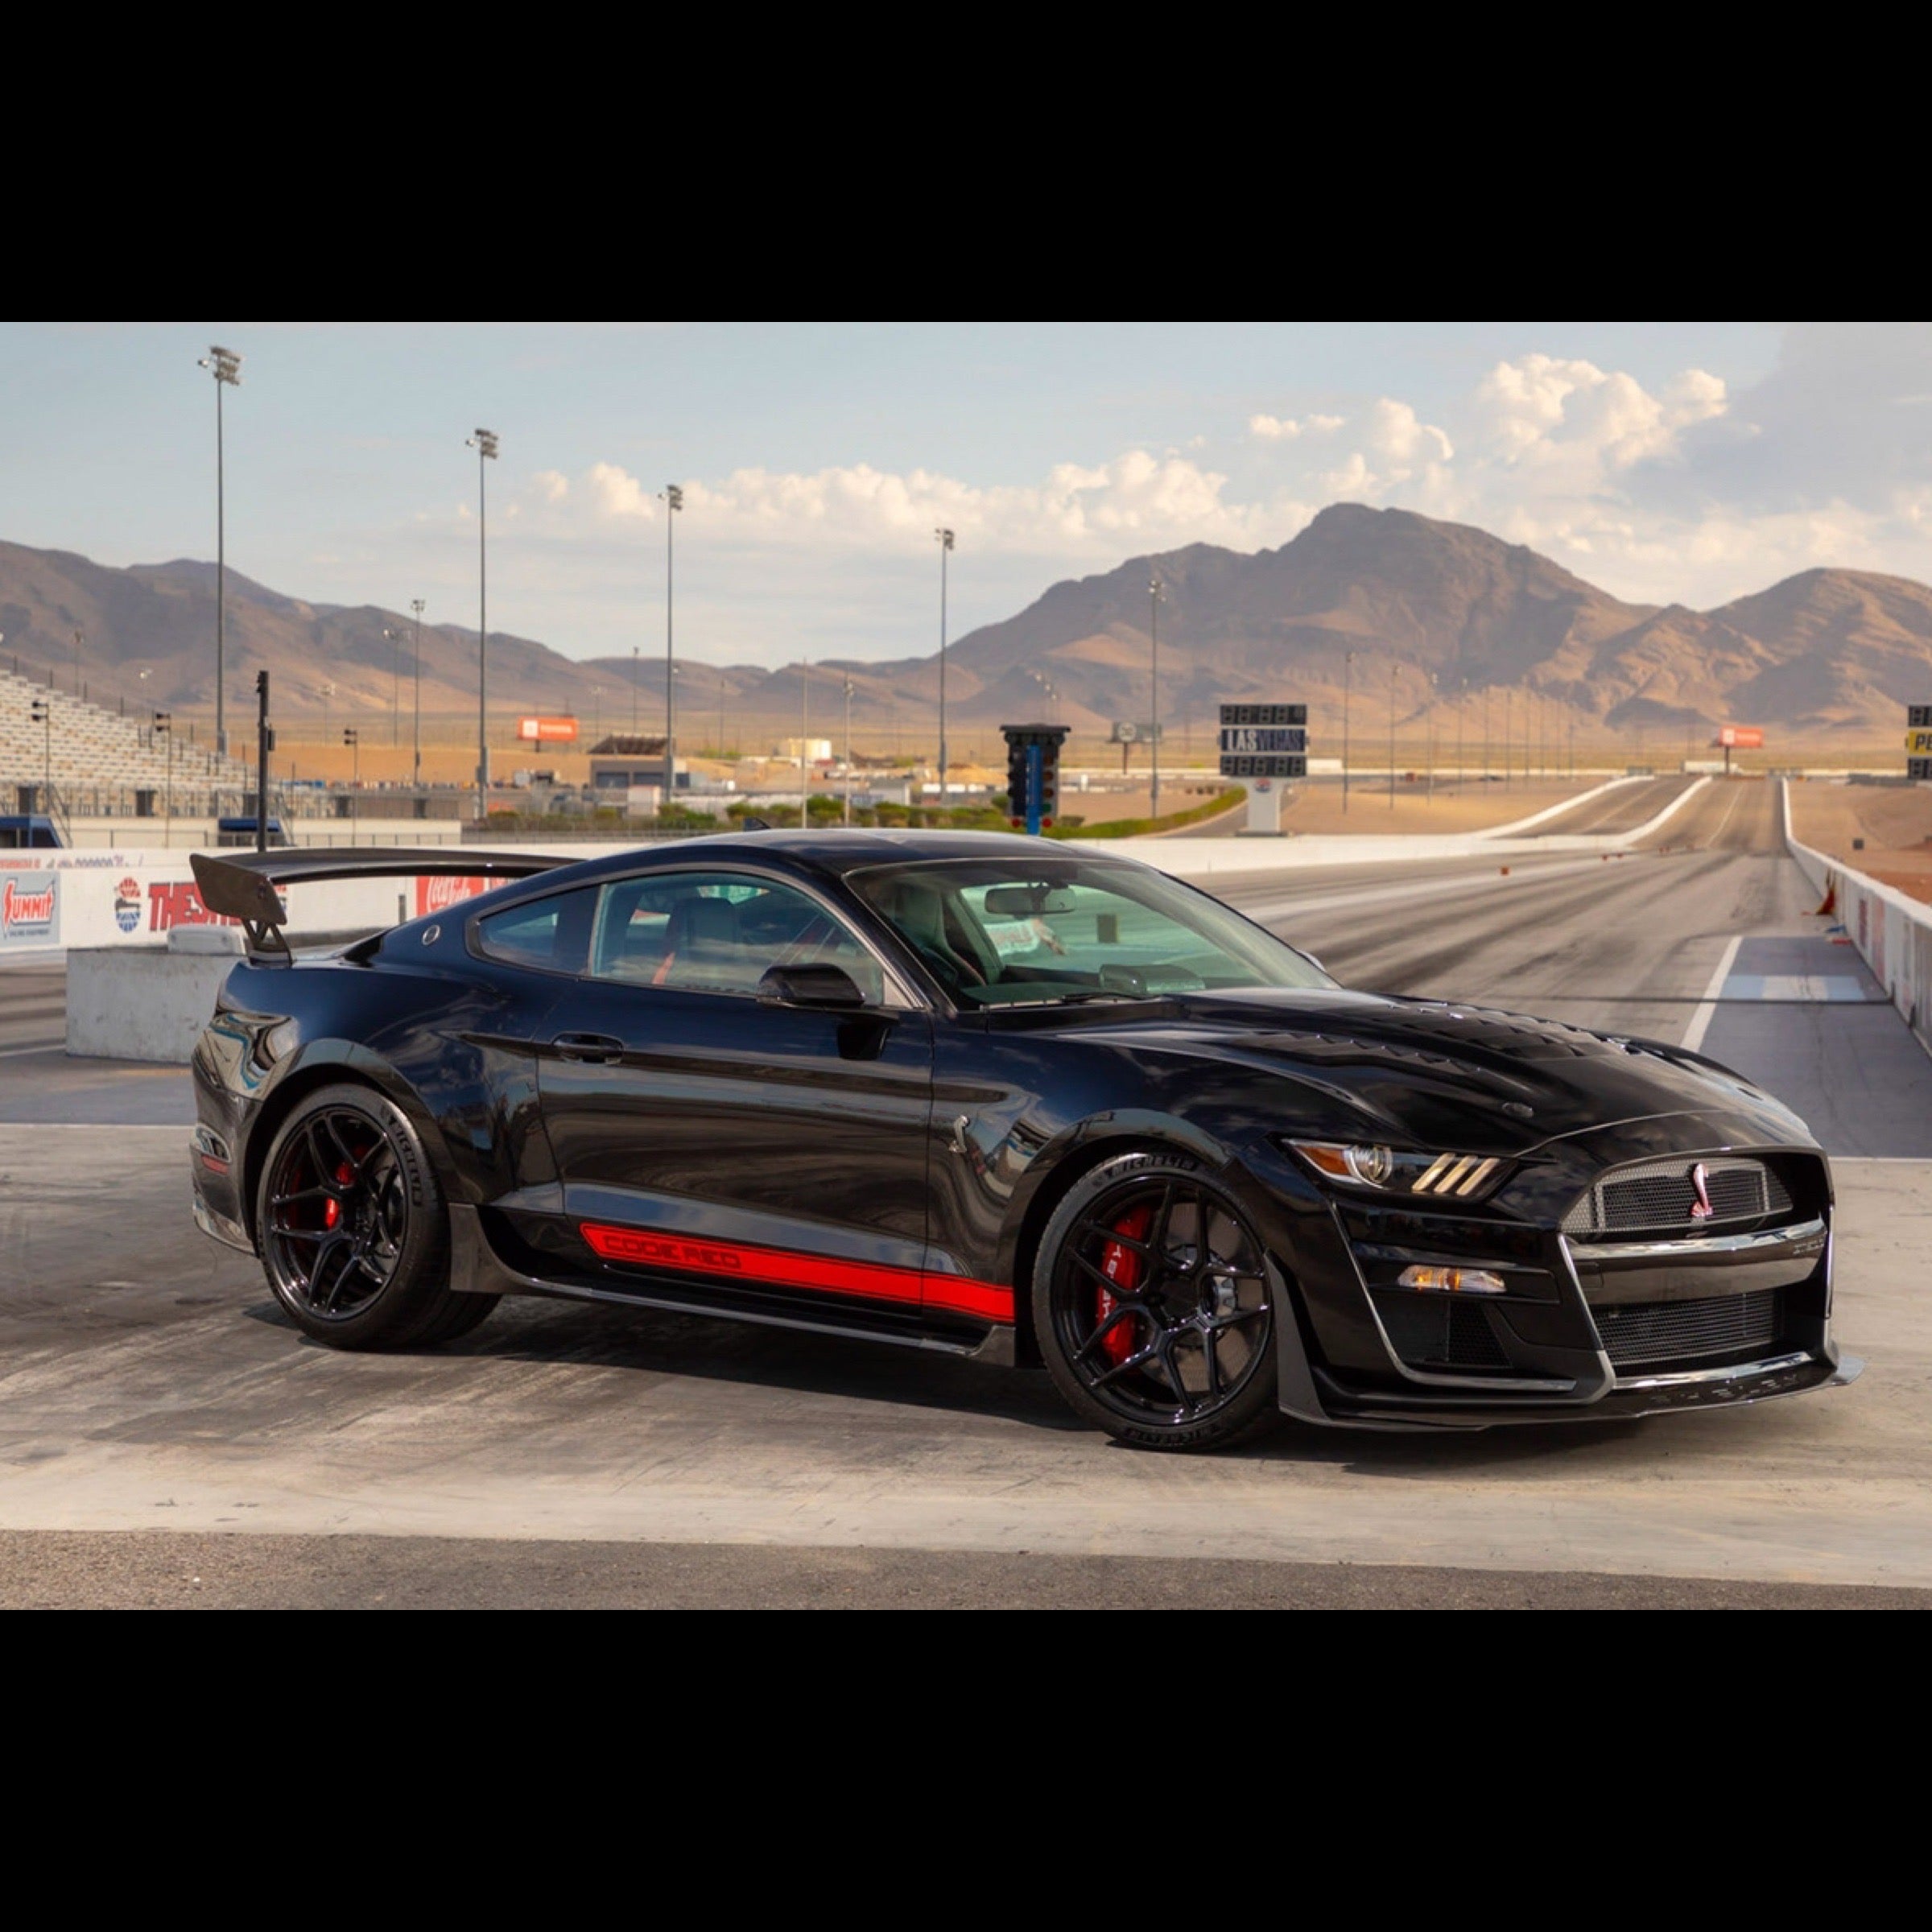 Black Mustang gt500 code red at a drag strip